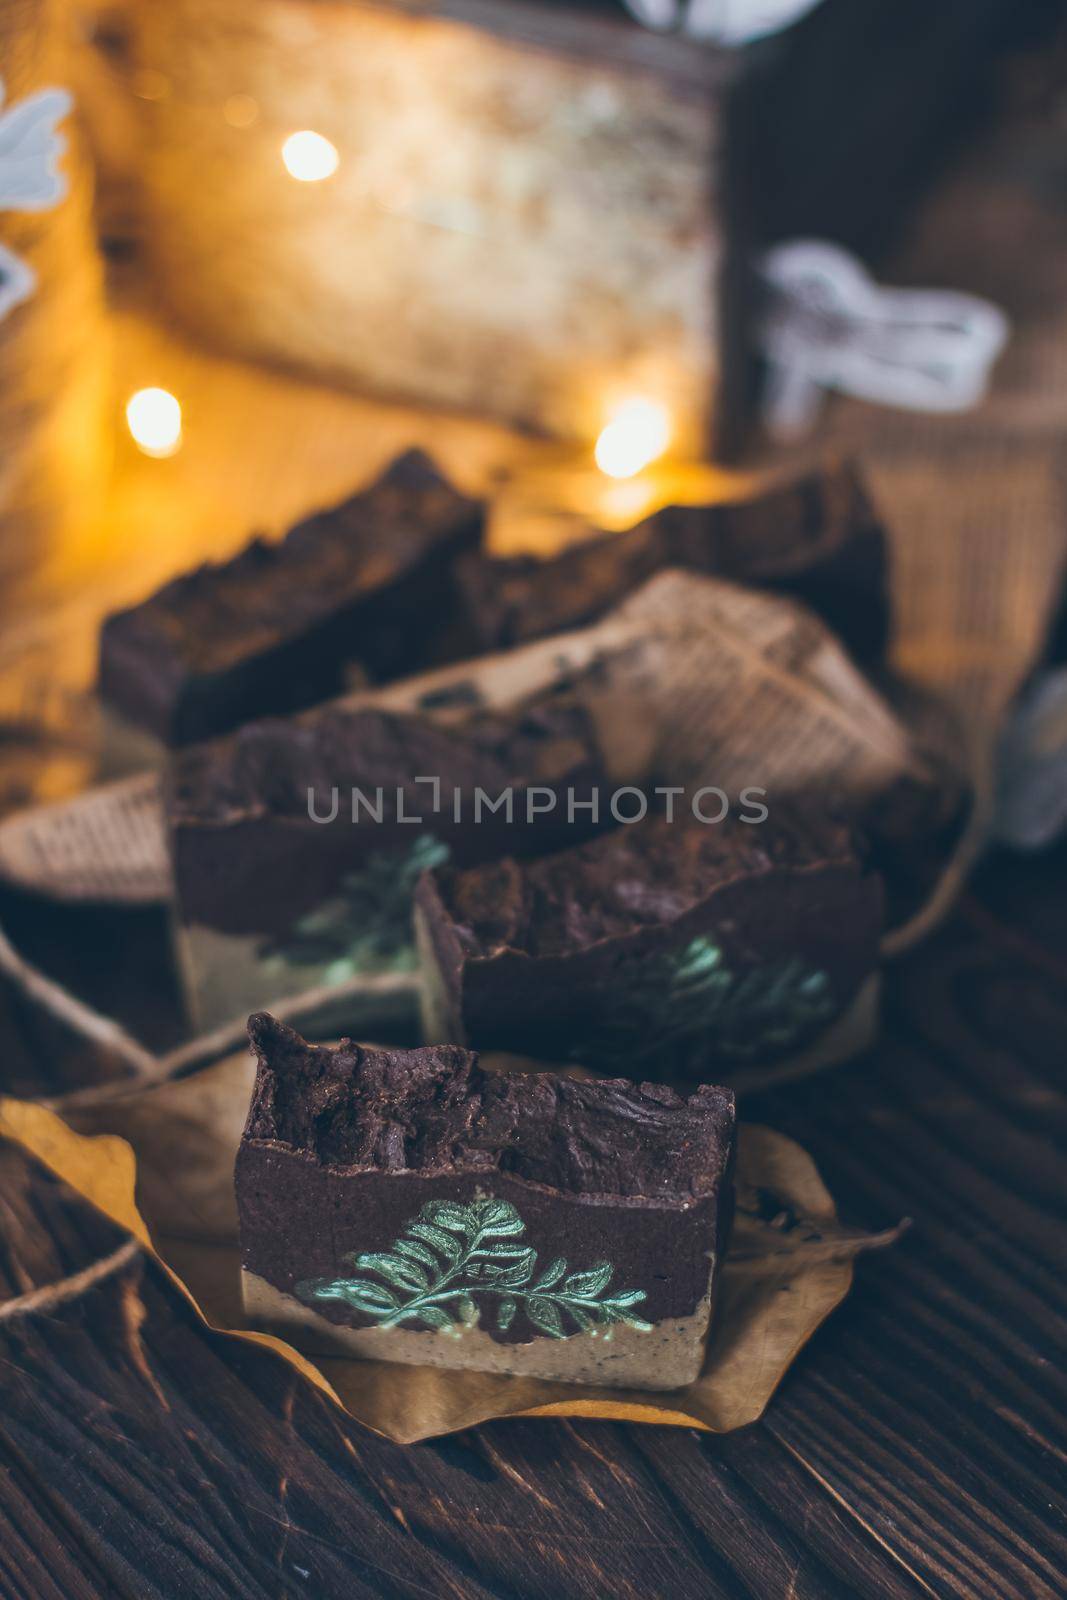 Pieces of beautiful natural handcrafted soap on wooden background with botanical elements, close up view. For relax, health, spa and aromatherapy.